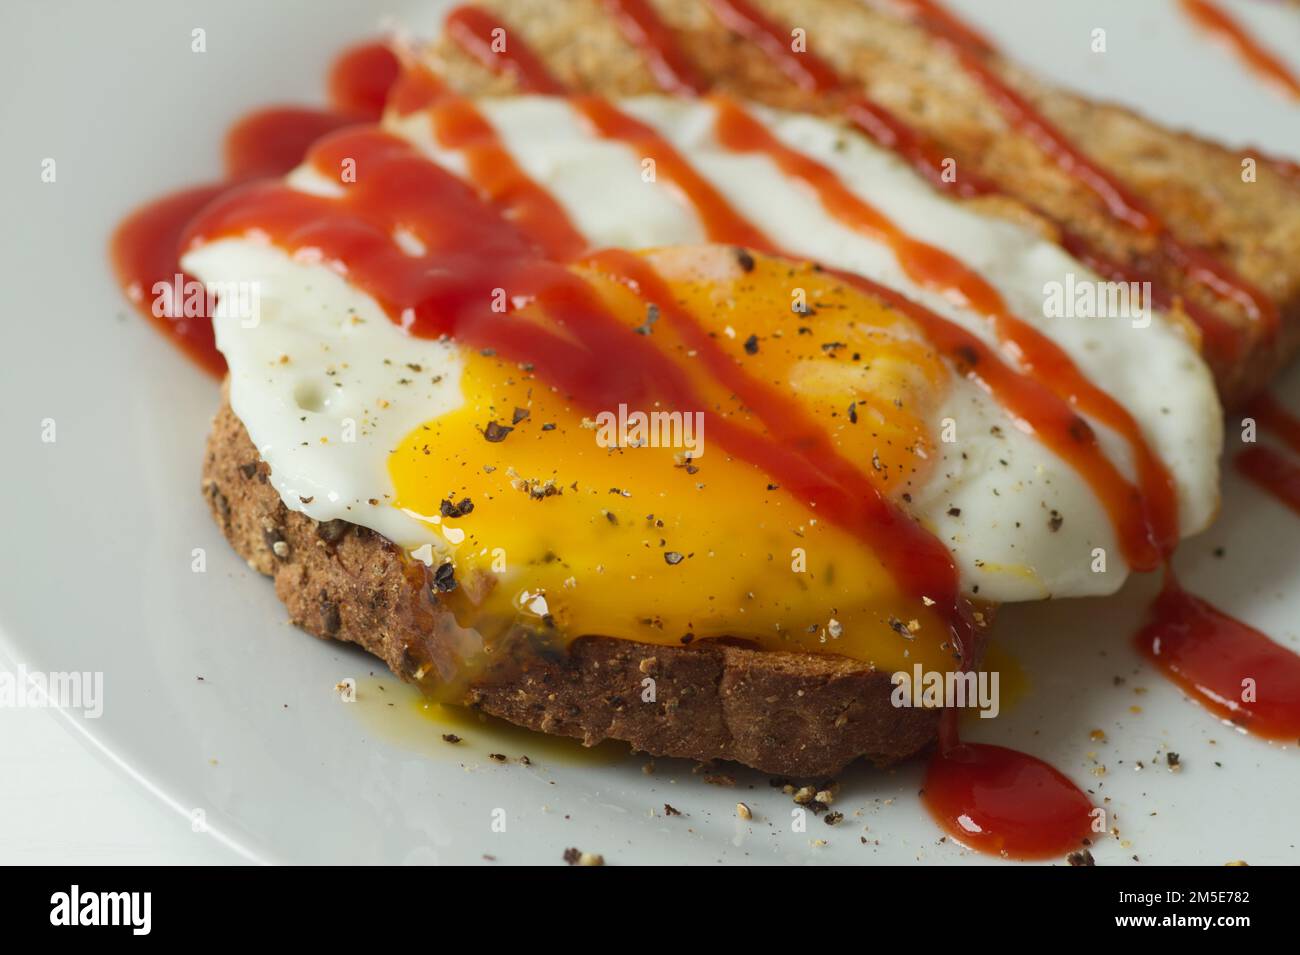 Fried egg on a slice of toasted seeded bread with black pepper and tomato ketchup on top Stock Photo